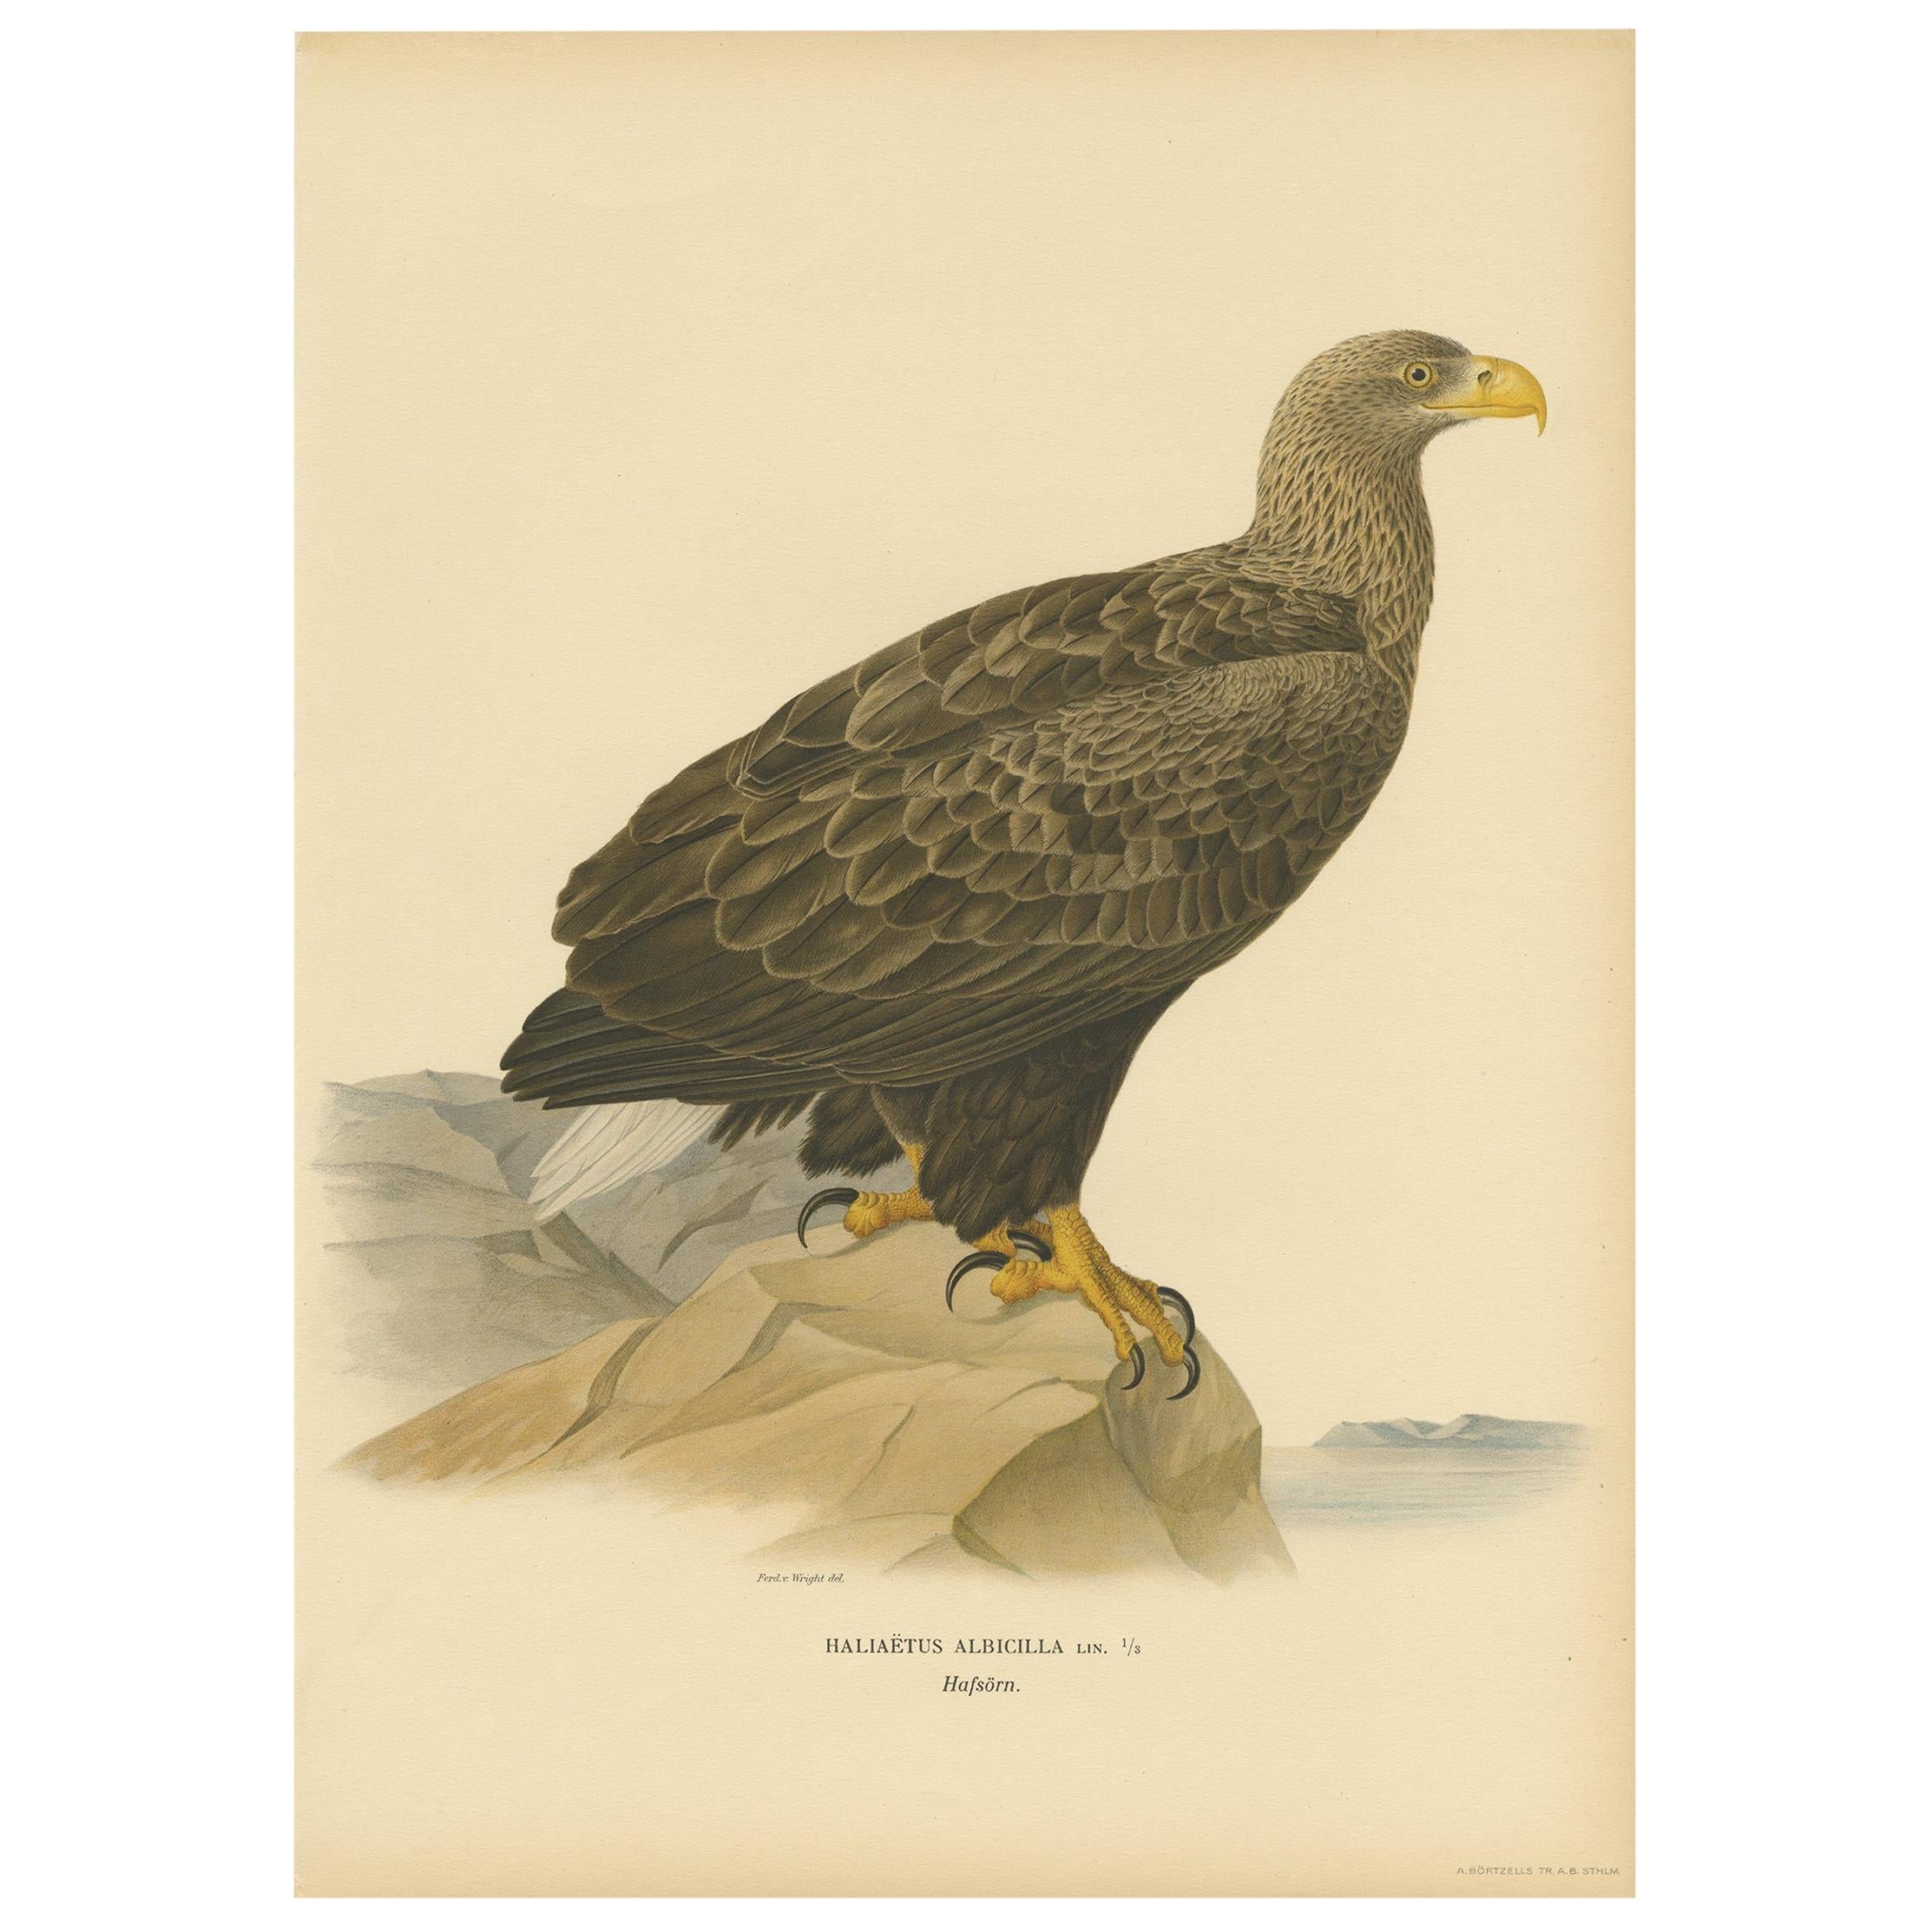 Antique Bird Print of the White-Tailed Eagle, 1917